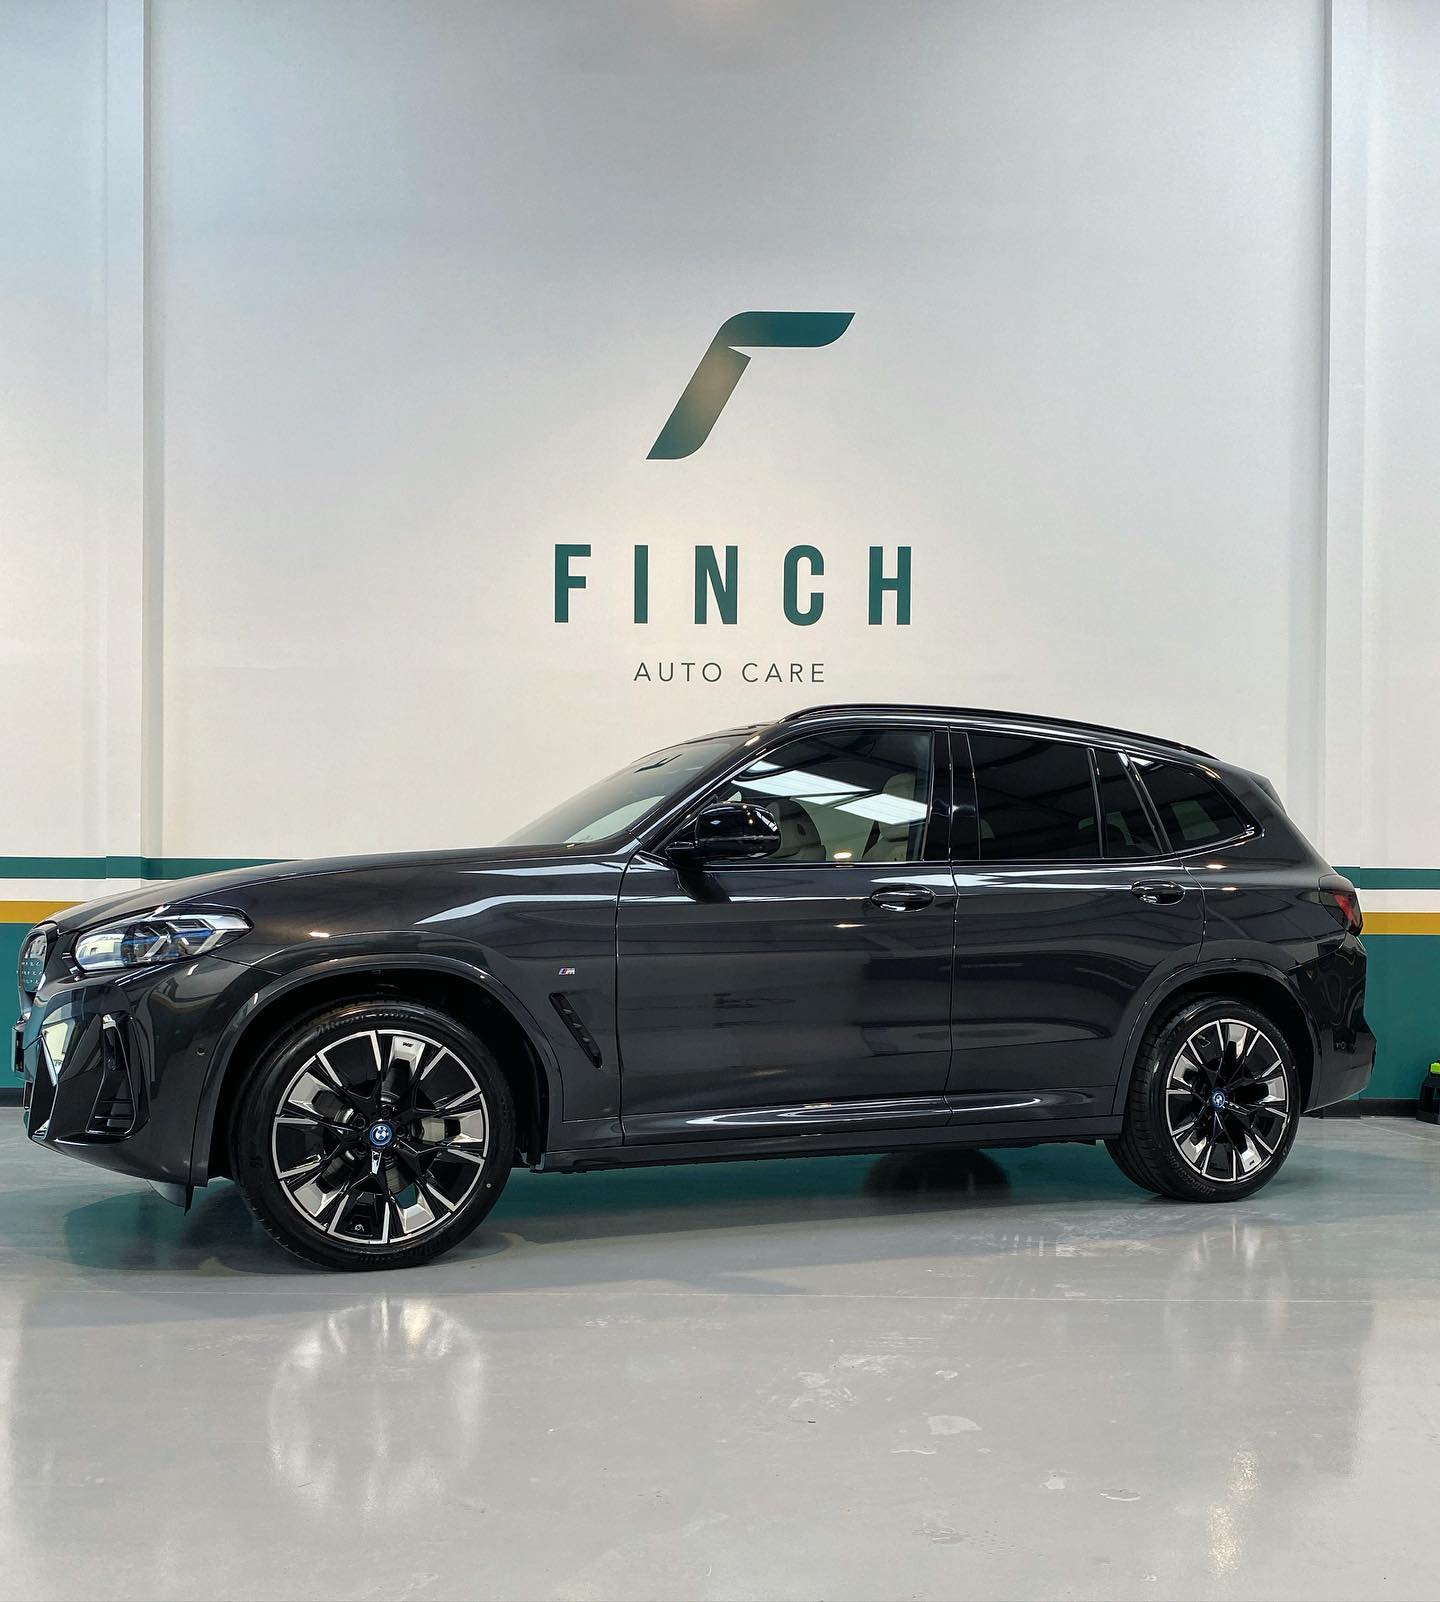 A black luxury suv parked inside a clean and modern vehicle service center with the signage "finch auto care" on the wall behind it.